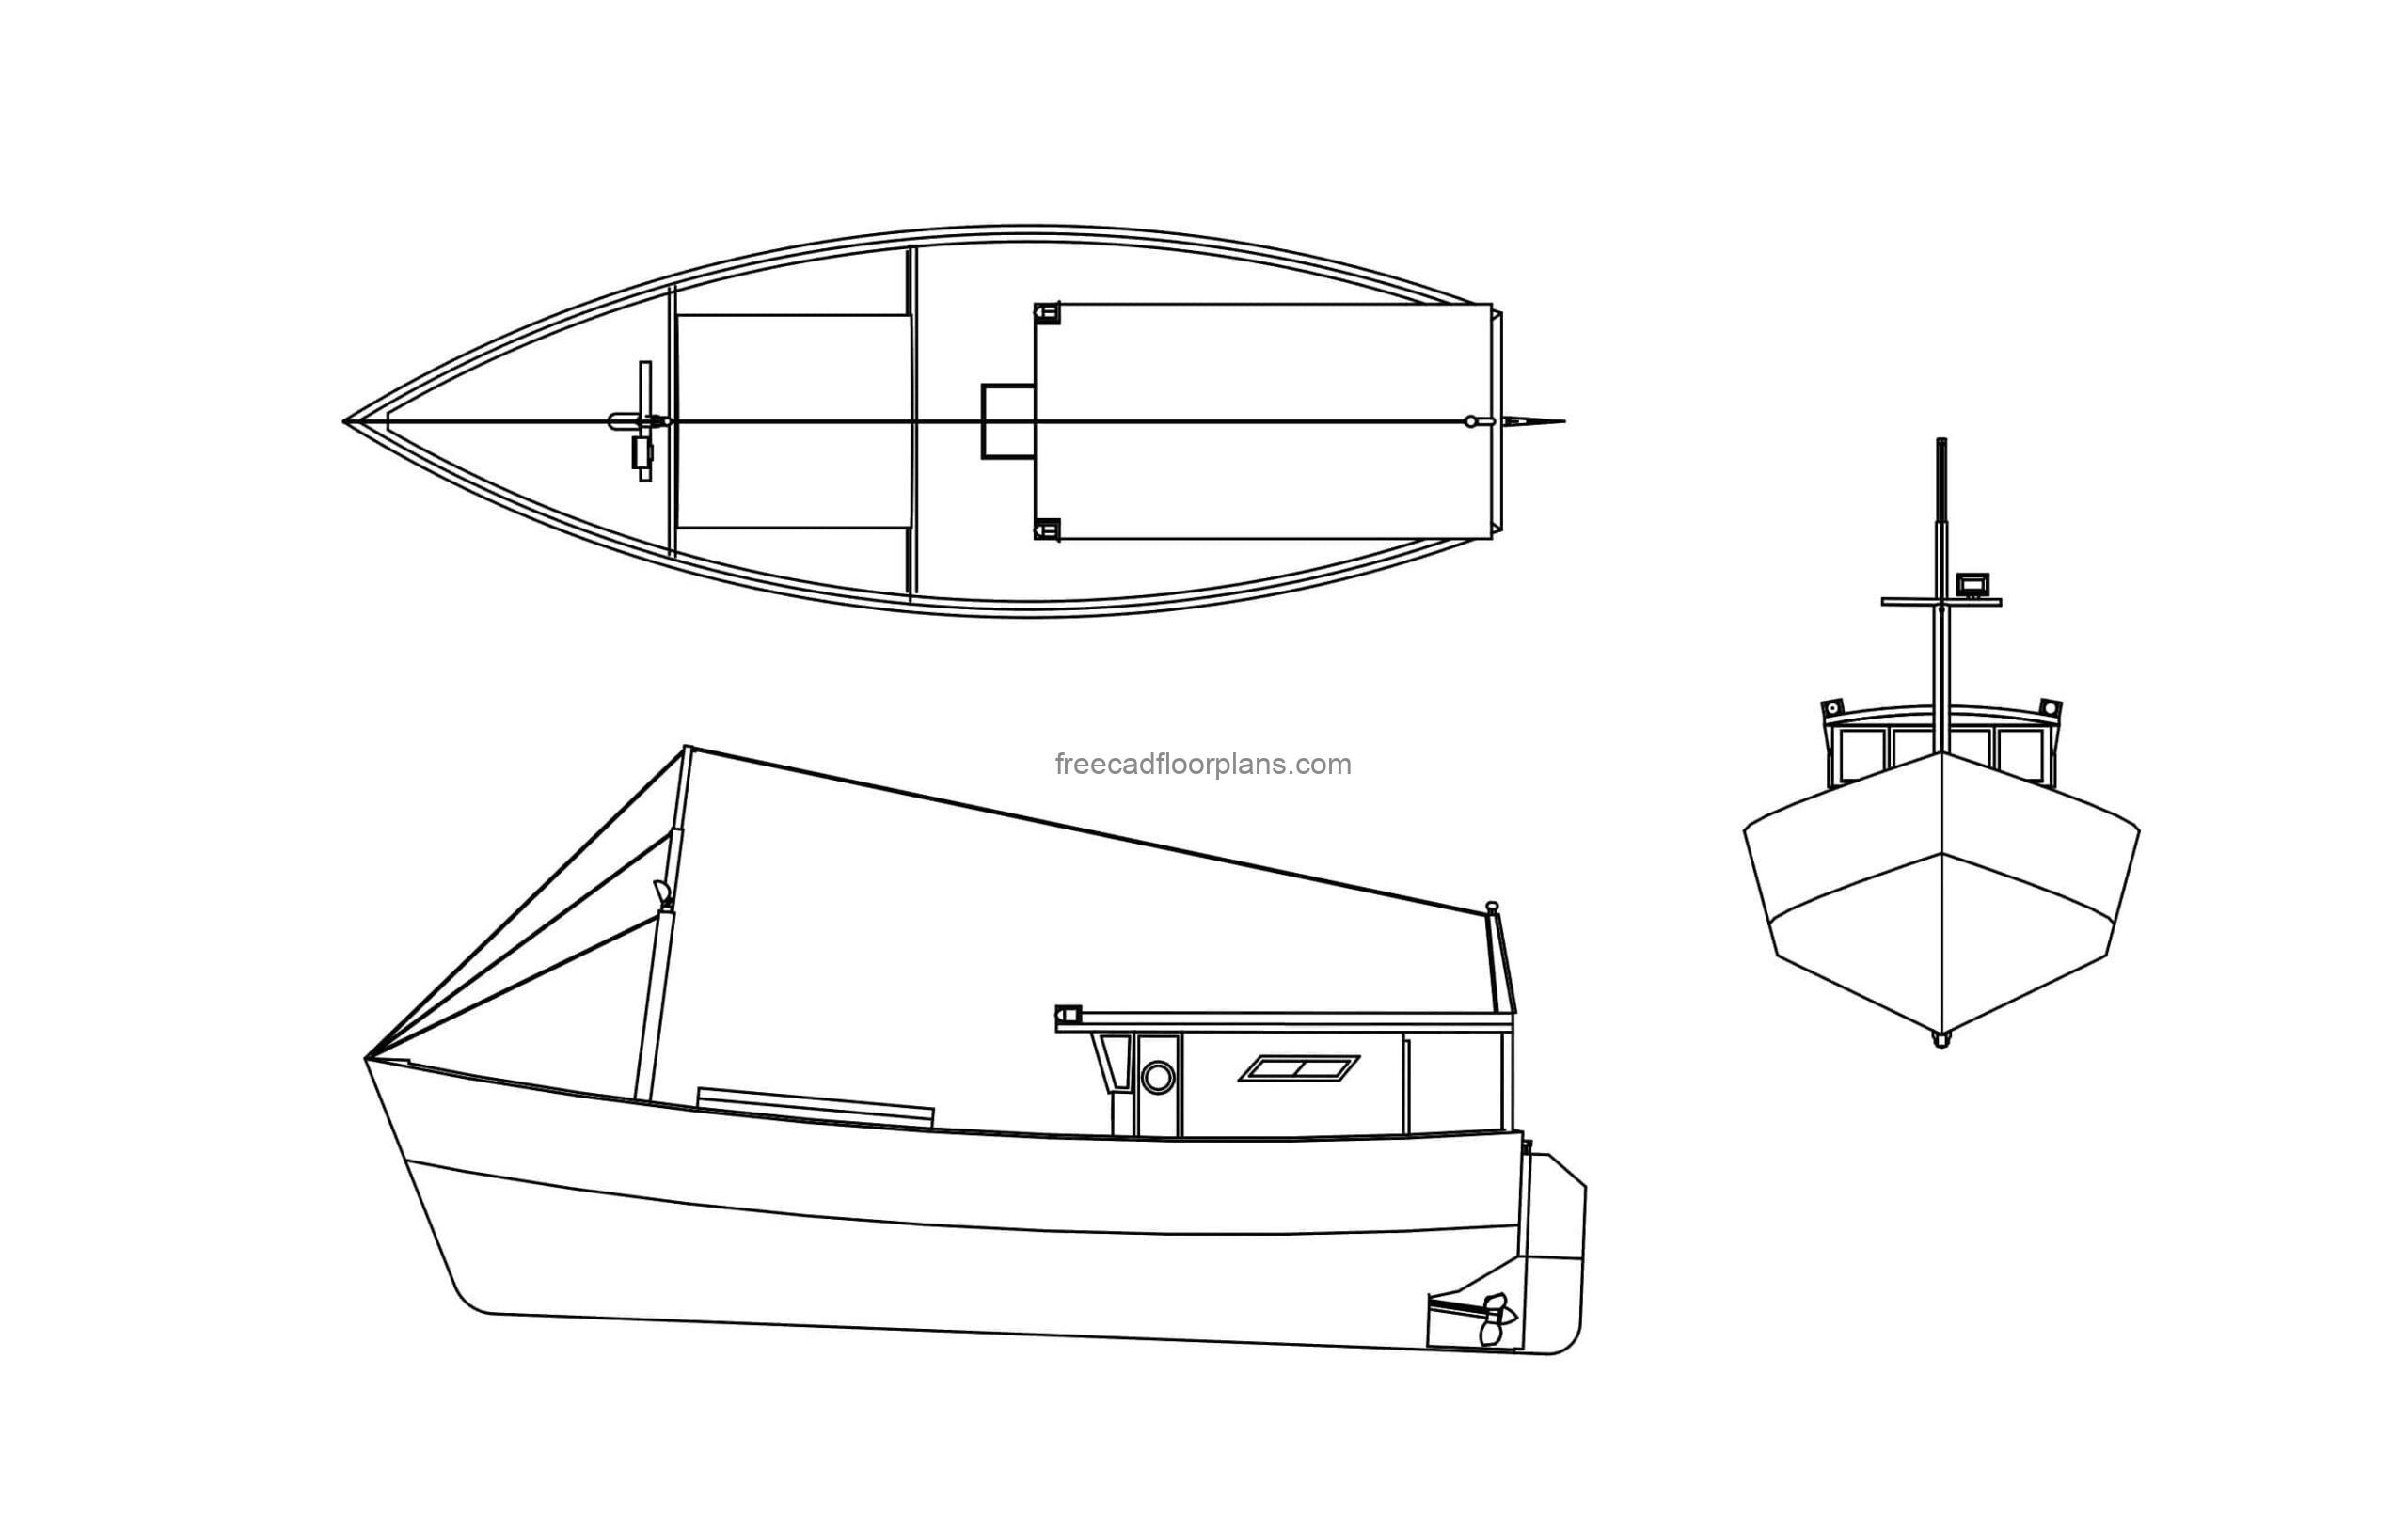 fishing boat drawing model in dgw format CAD file for free download